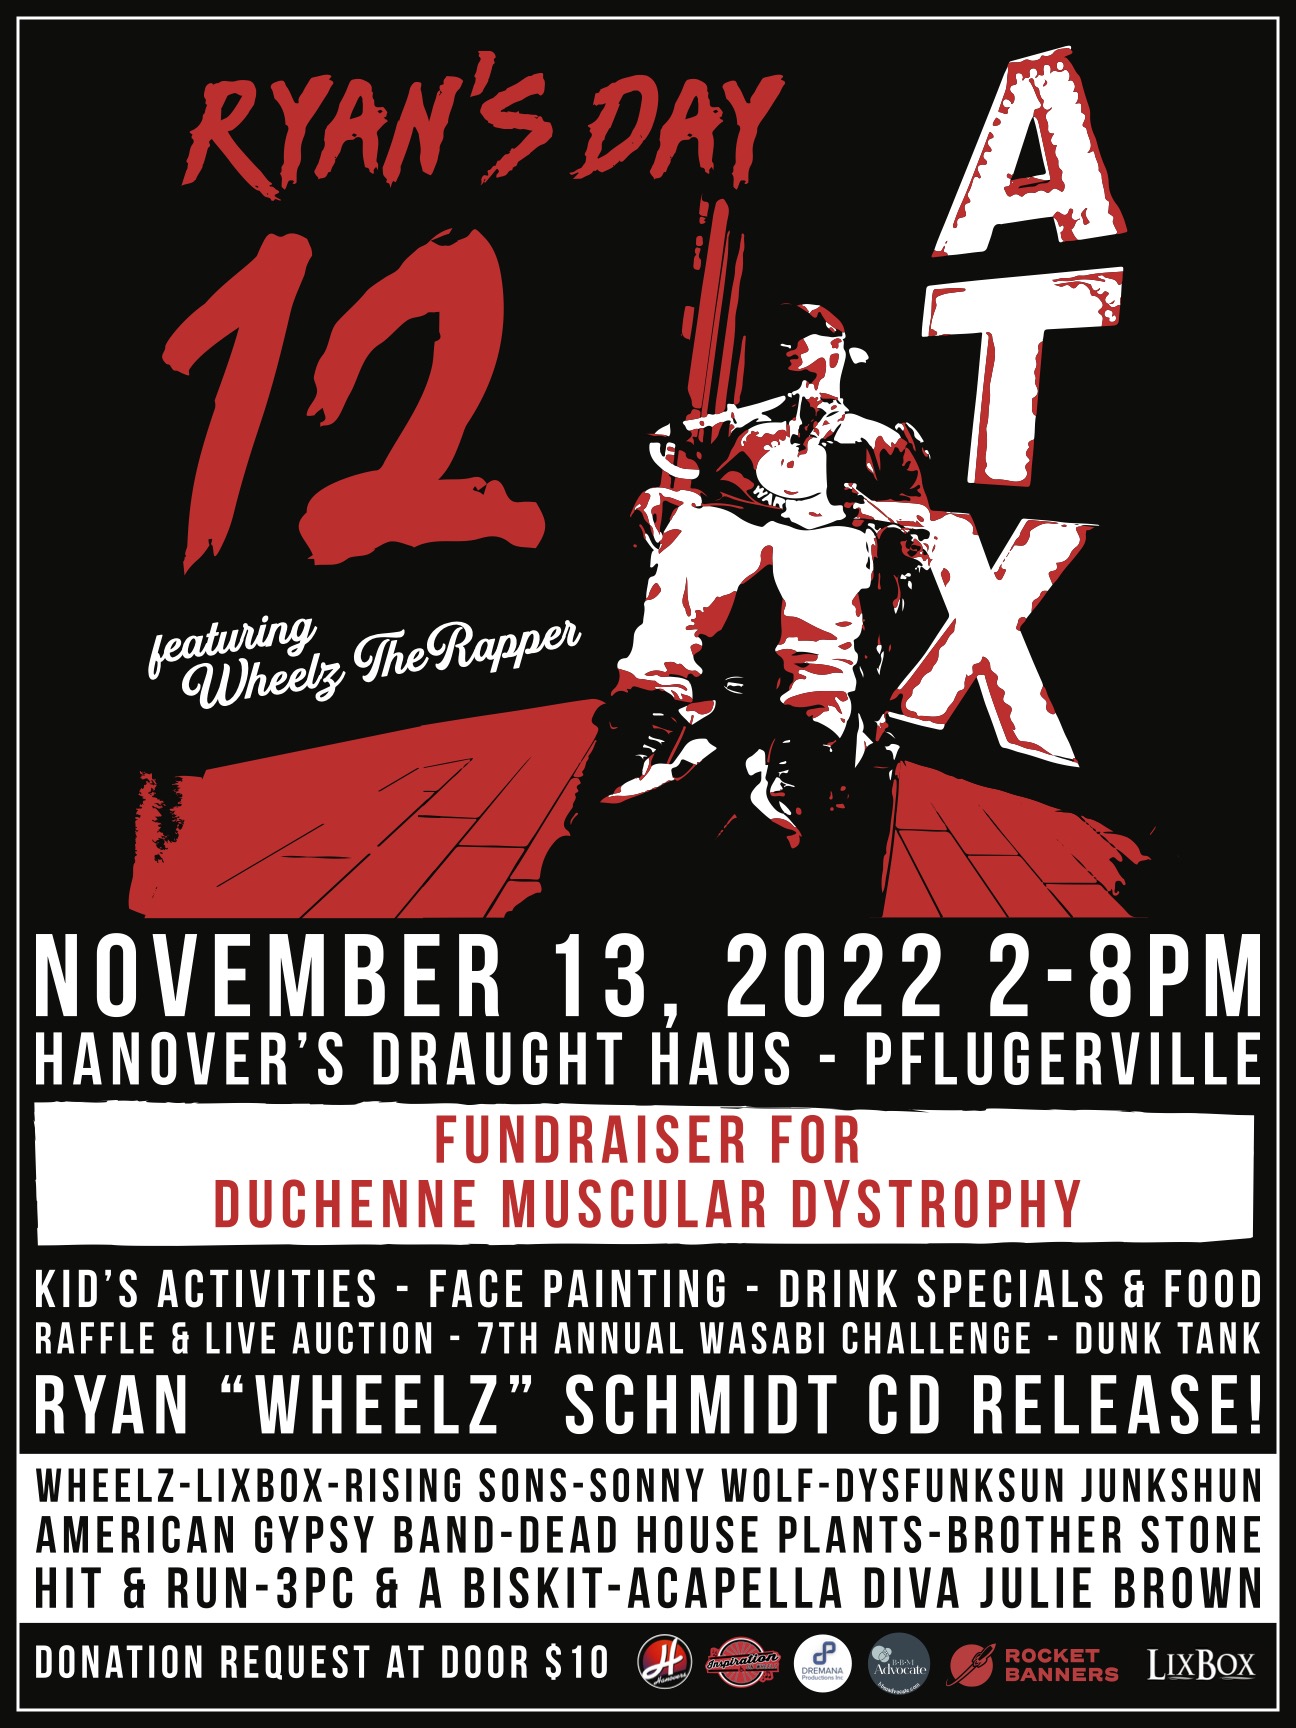 Ryan's Day 12 is Nov 13th 2022, 2-8pm @ Hanovers Draught Haus, Pflugerville, Tx. This family-friendly event will feature 10 of Austin’s most popular musical acts and a performance by Wheelz himself.